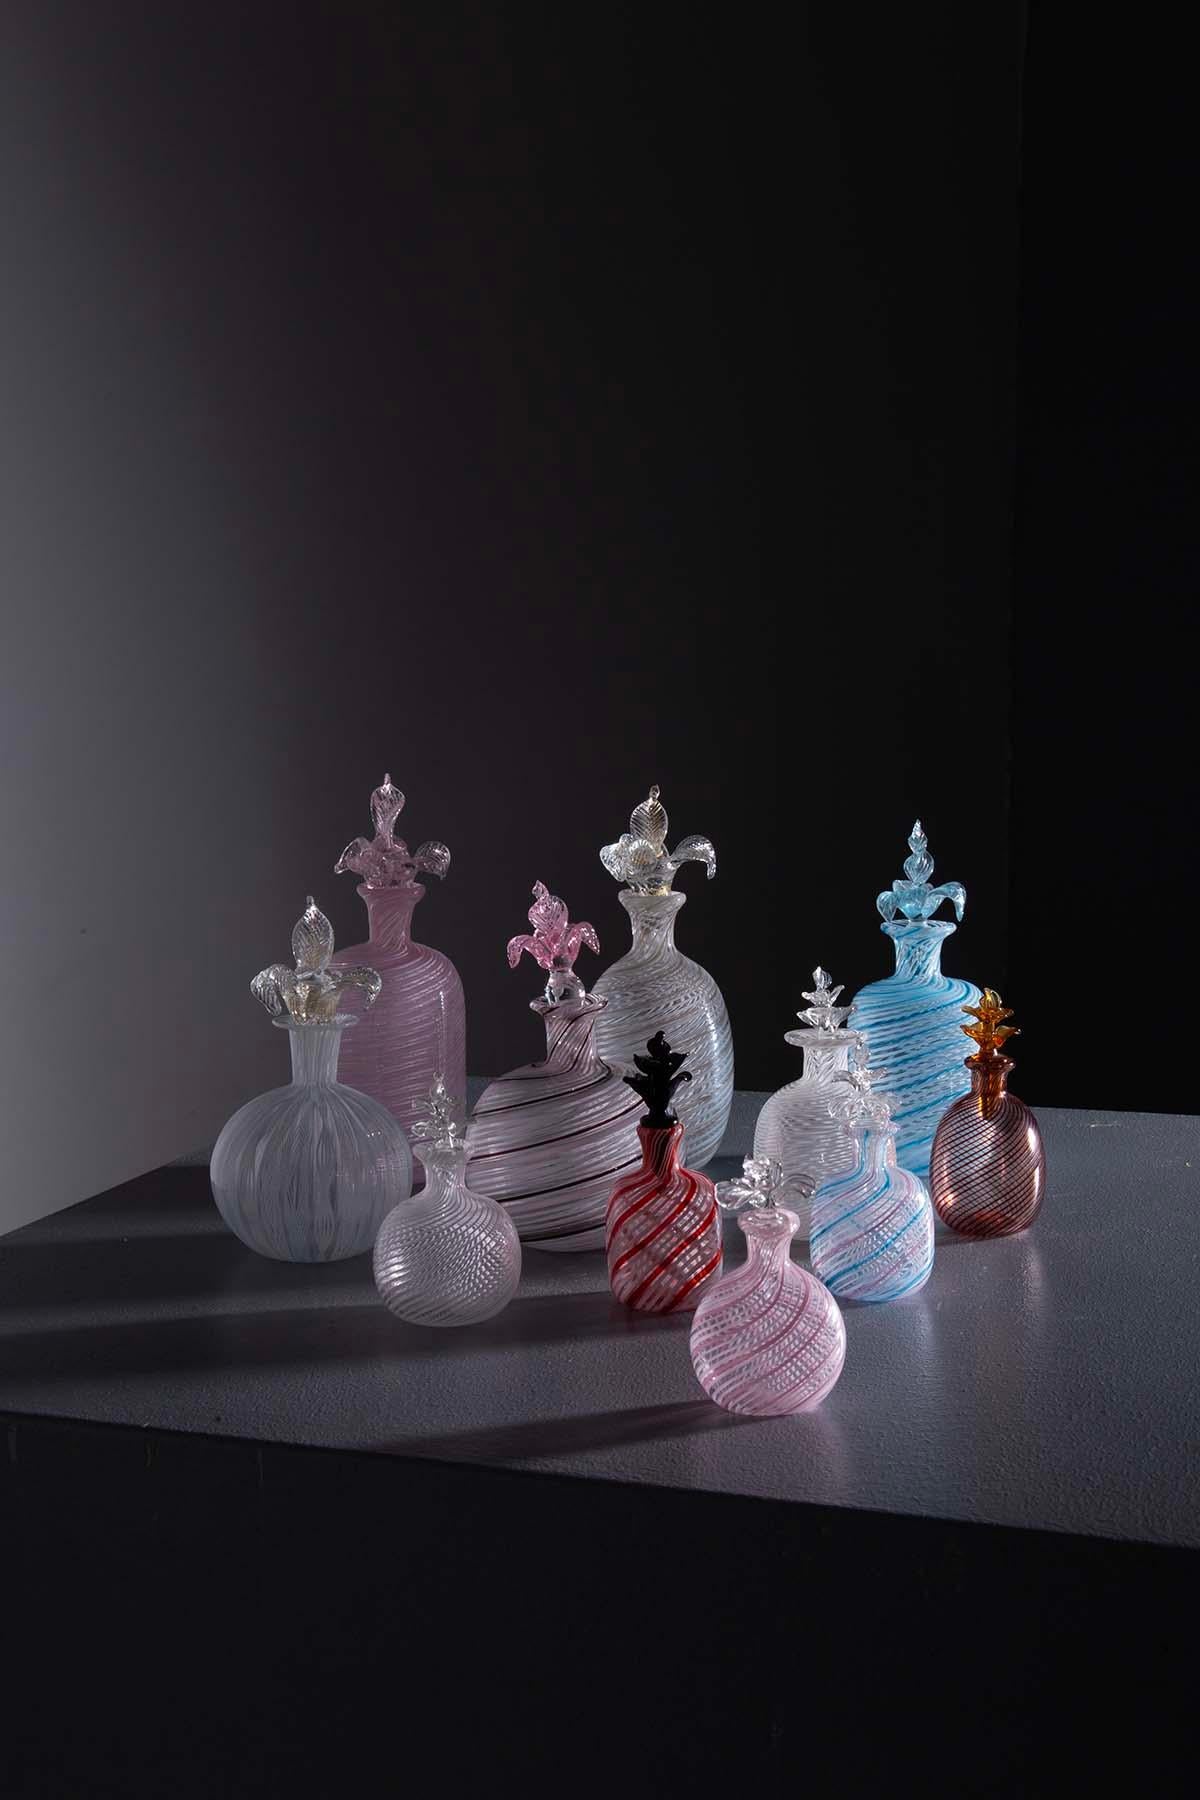 A set of 10 exquisite decorative ampoules in precious Murano glass from the 1960s is a true artistic gem.

This glass has been skillfully and creatively shaped by Italian master glass artisans, using a special technique called 